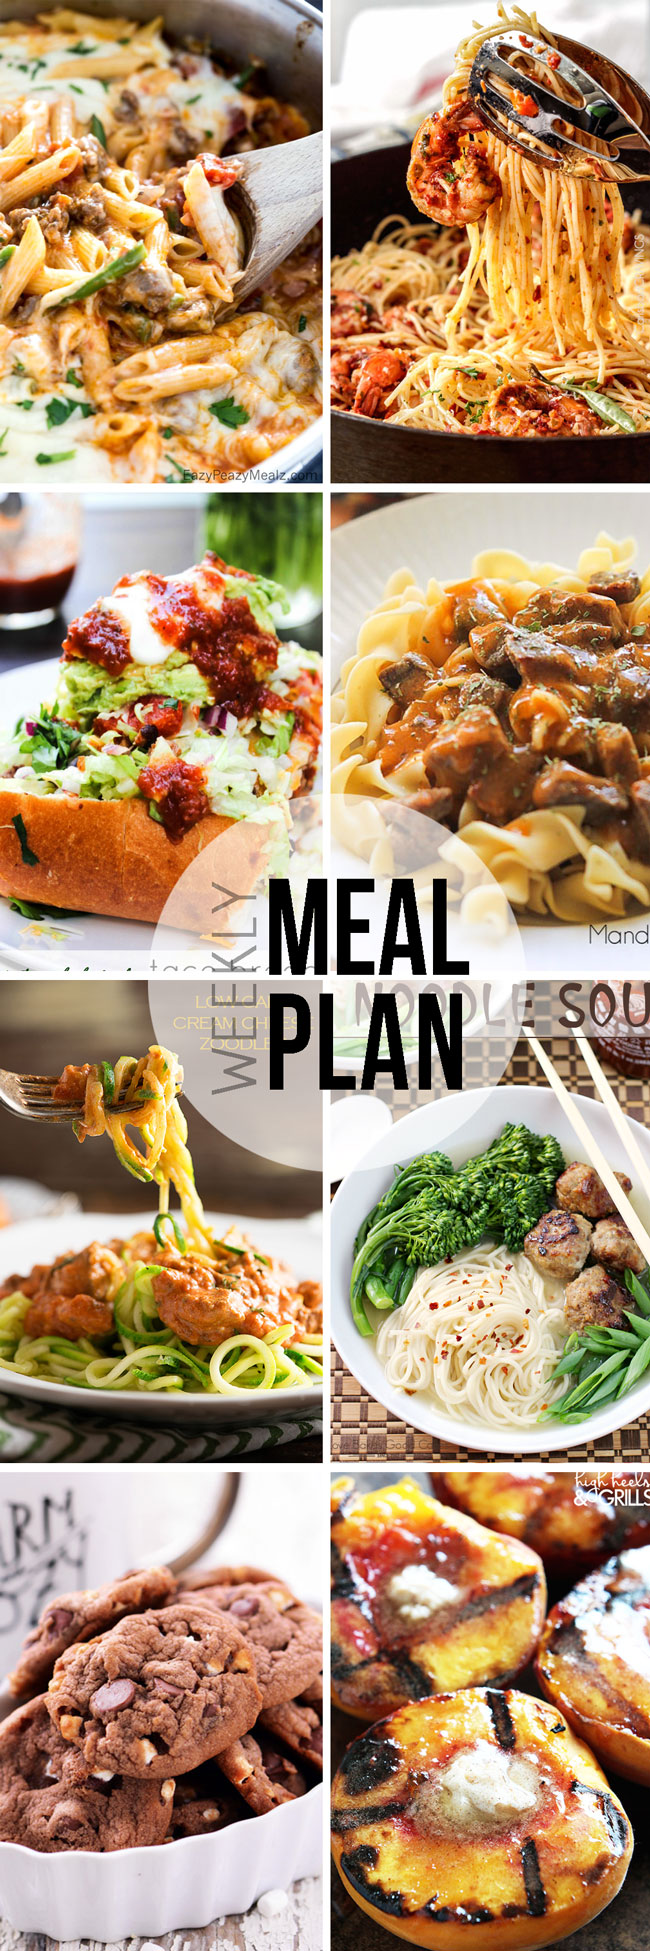 Easy Meal Plan Sunday #33